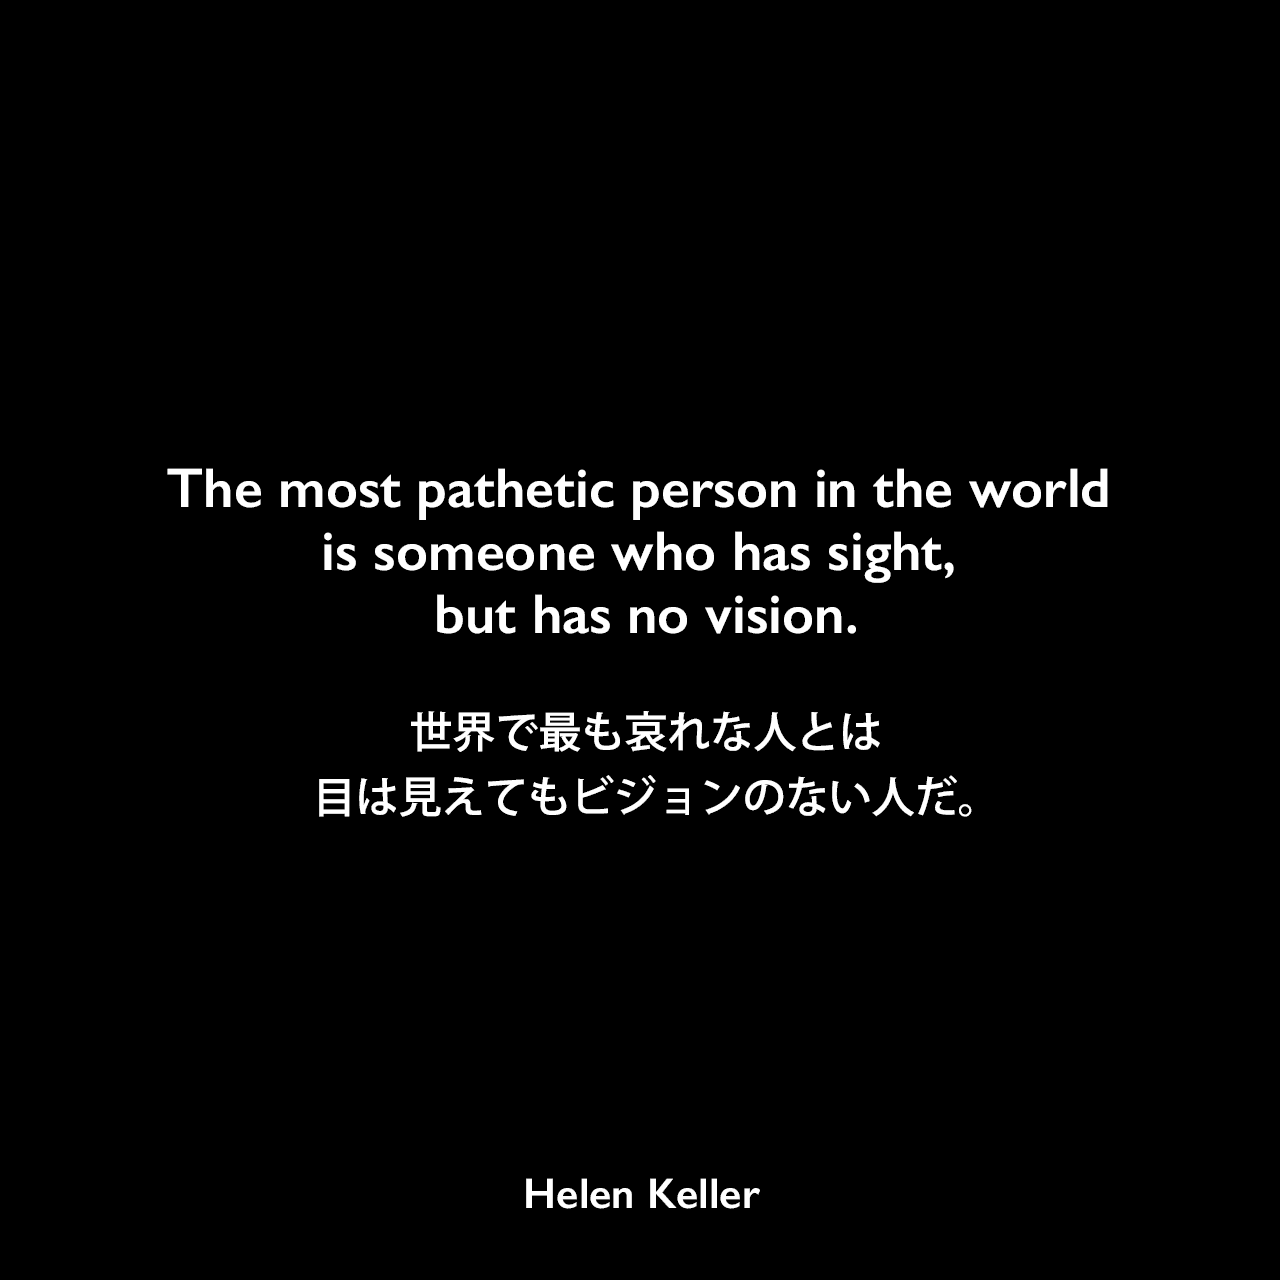 The most pathetic person in the world is someone who has sight, but has no vision.世界で最も哀れな人とは、目は見えてもビジョンのない人だ。Helen Keller